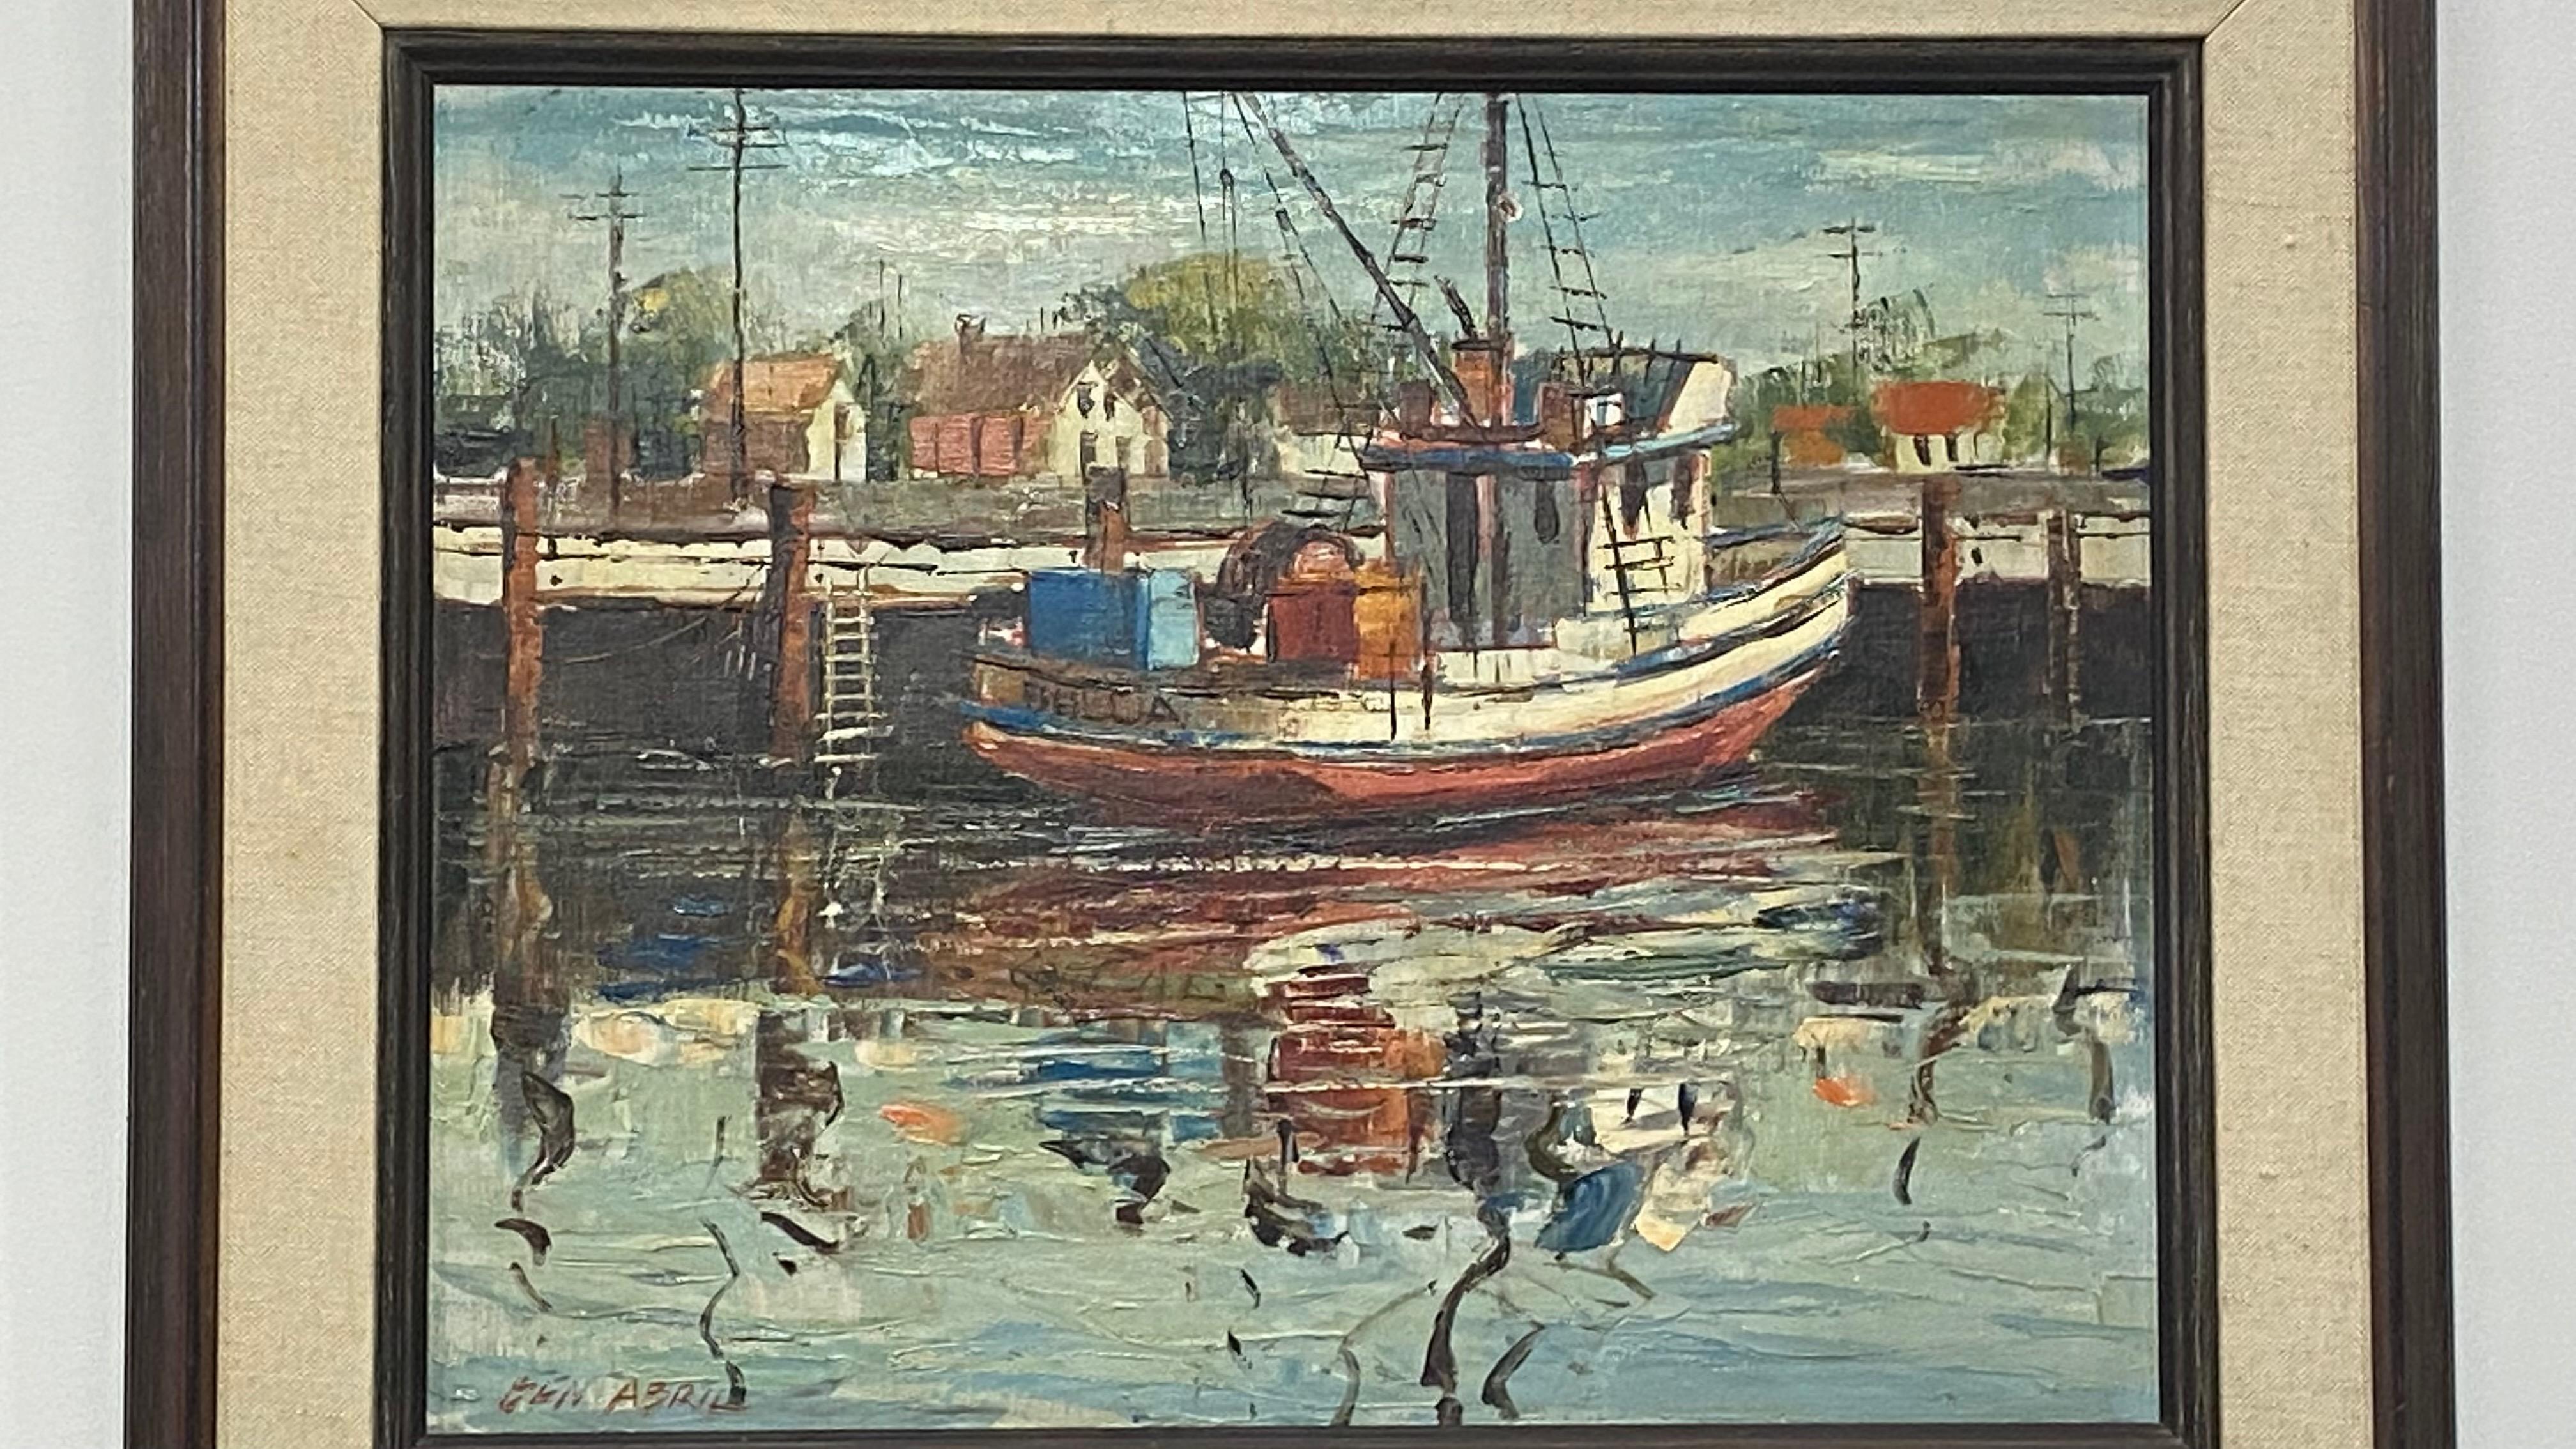 Canvas Fishing Boat Scene Painting by California Artist Ben Abril, Mid-20th Century For Sale